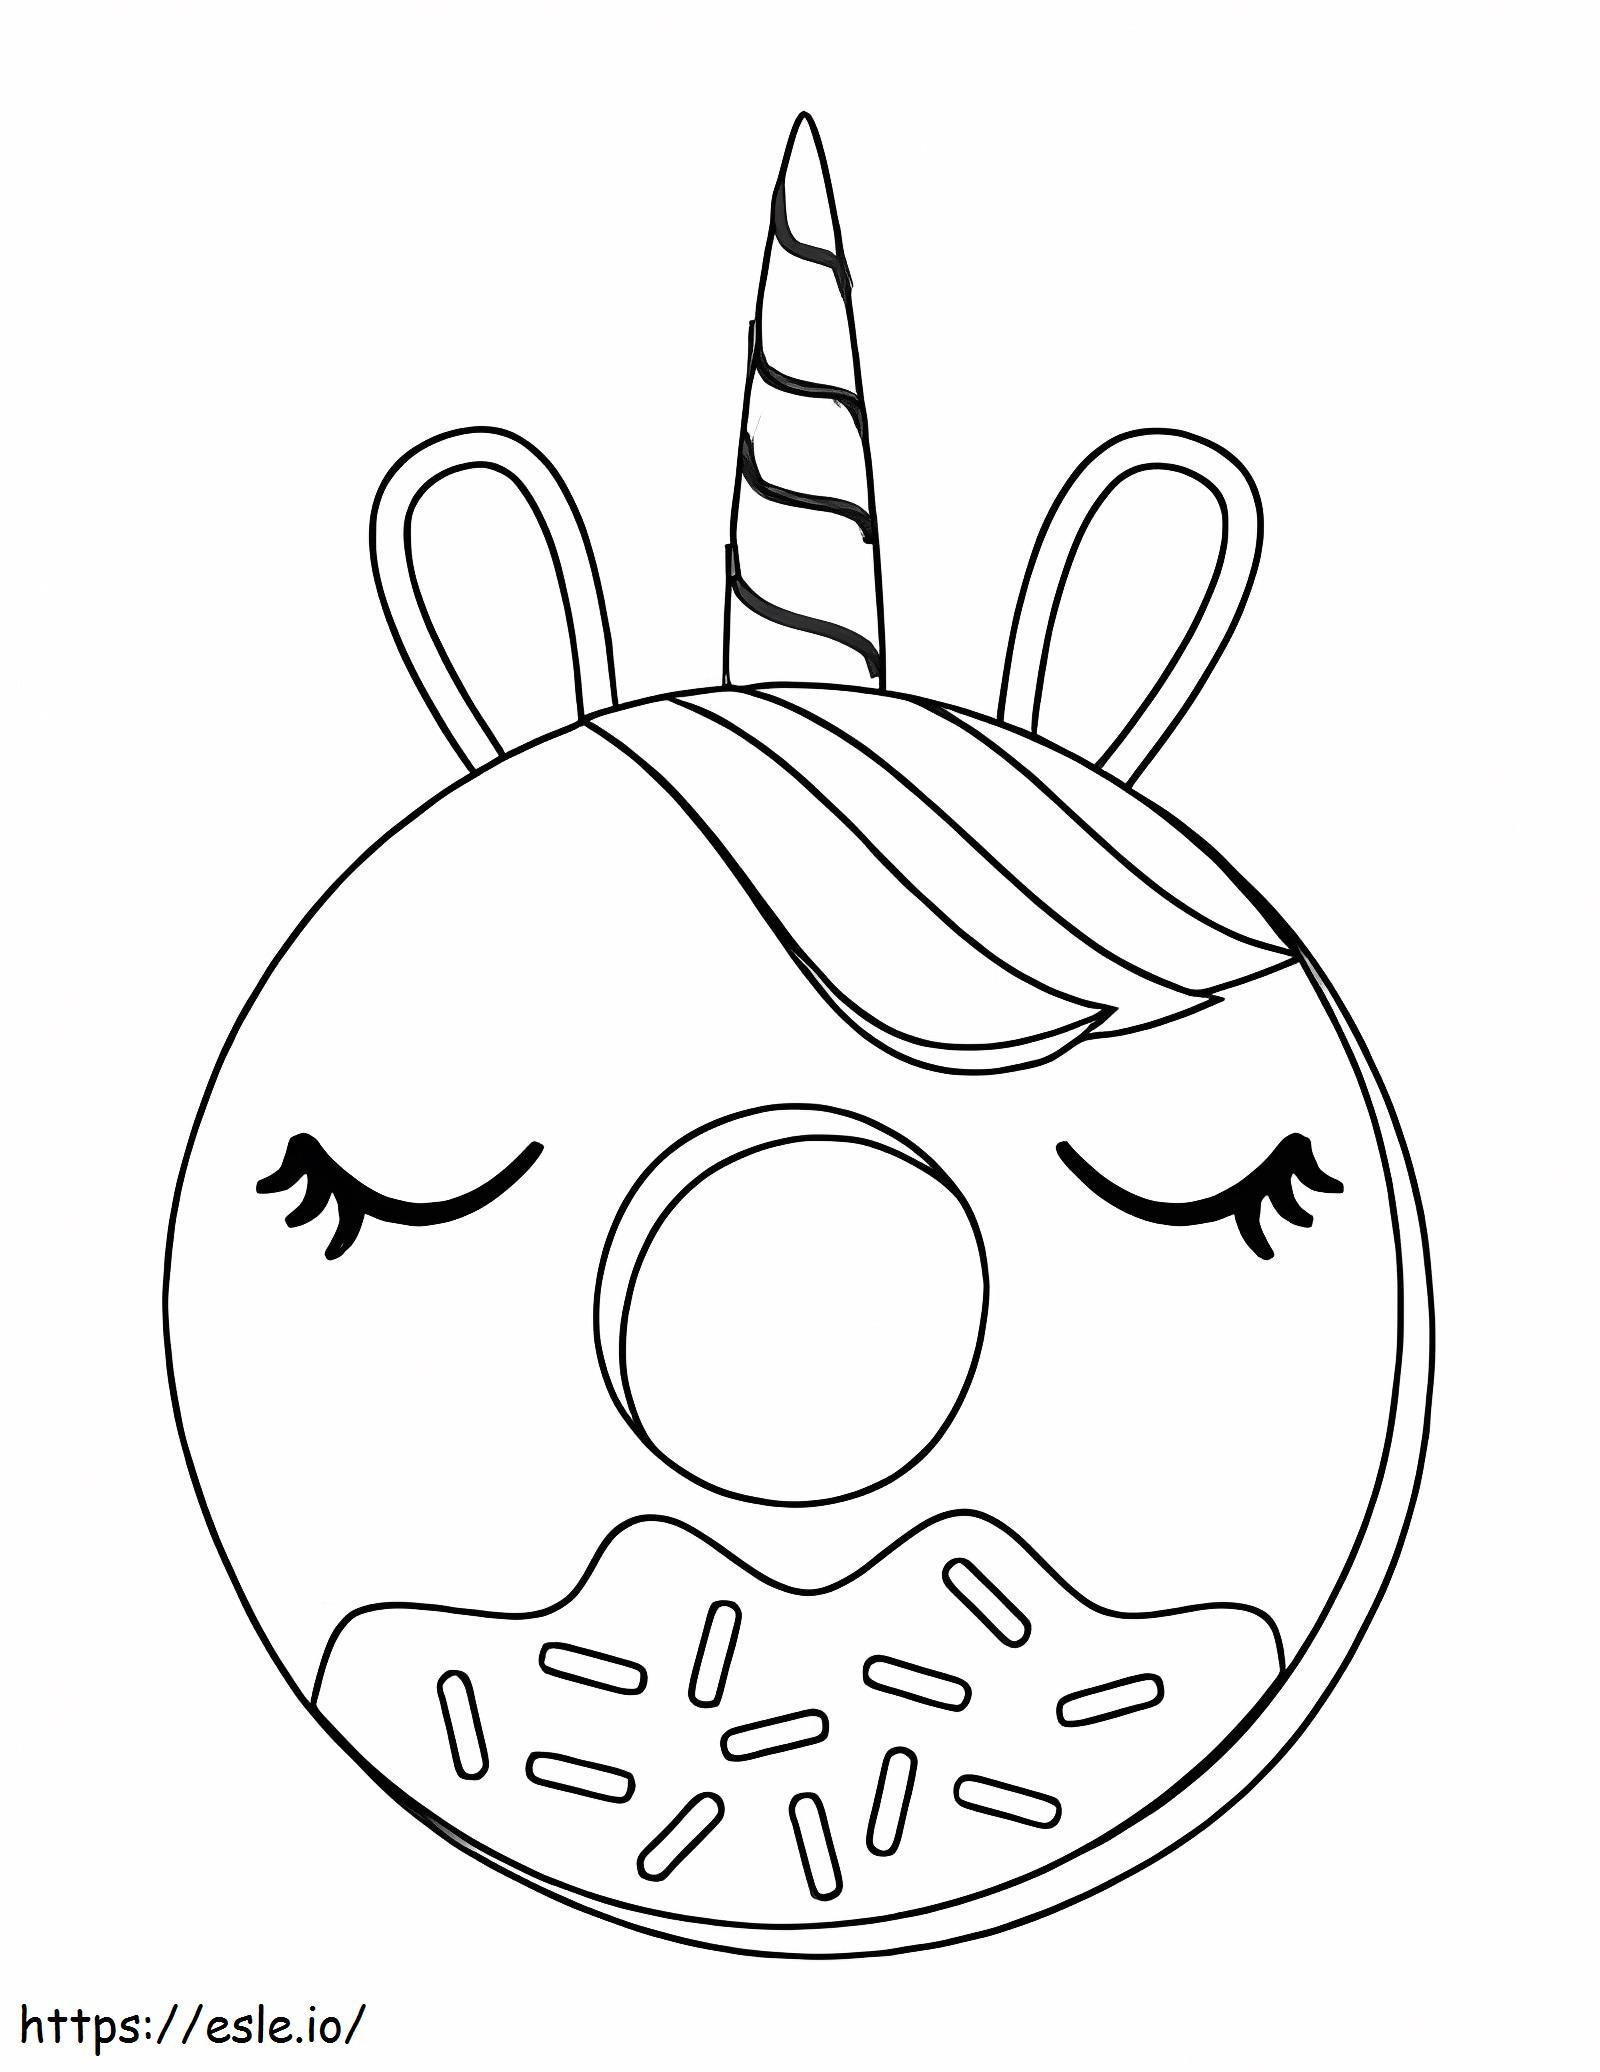 Unicorn Donut coloring page